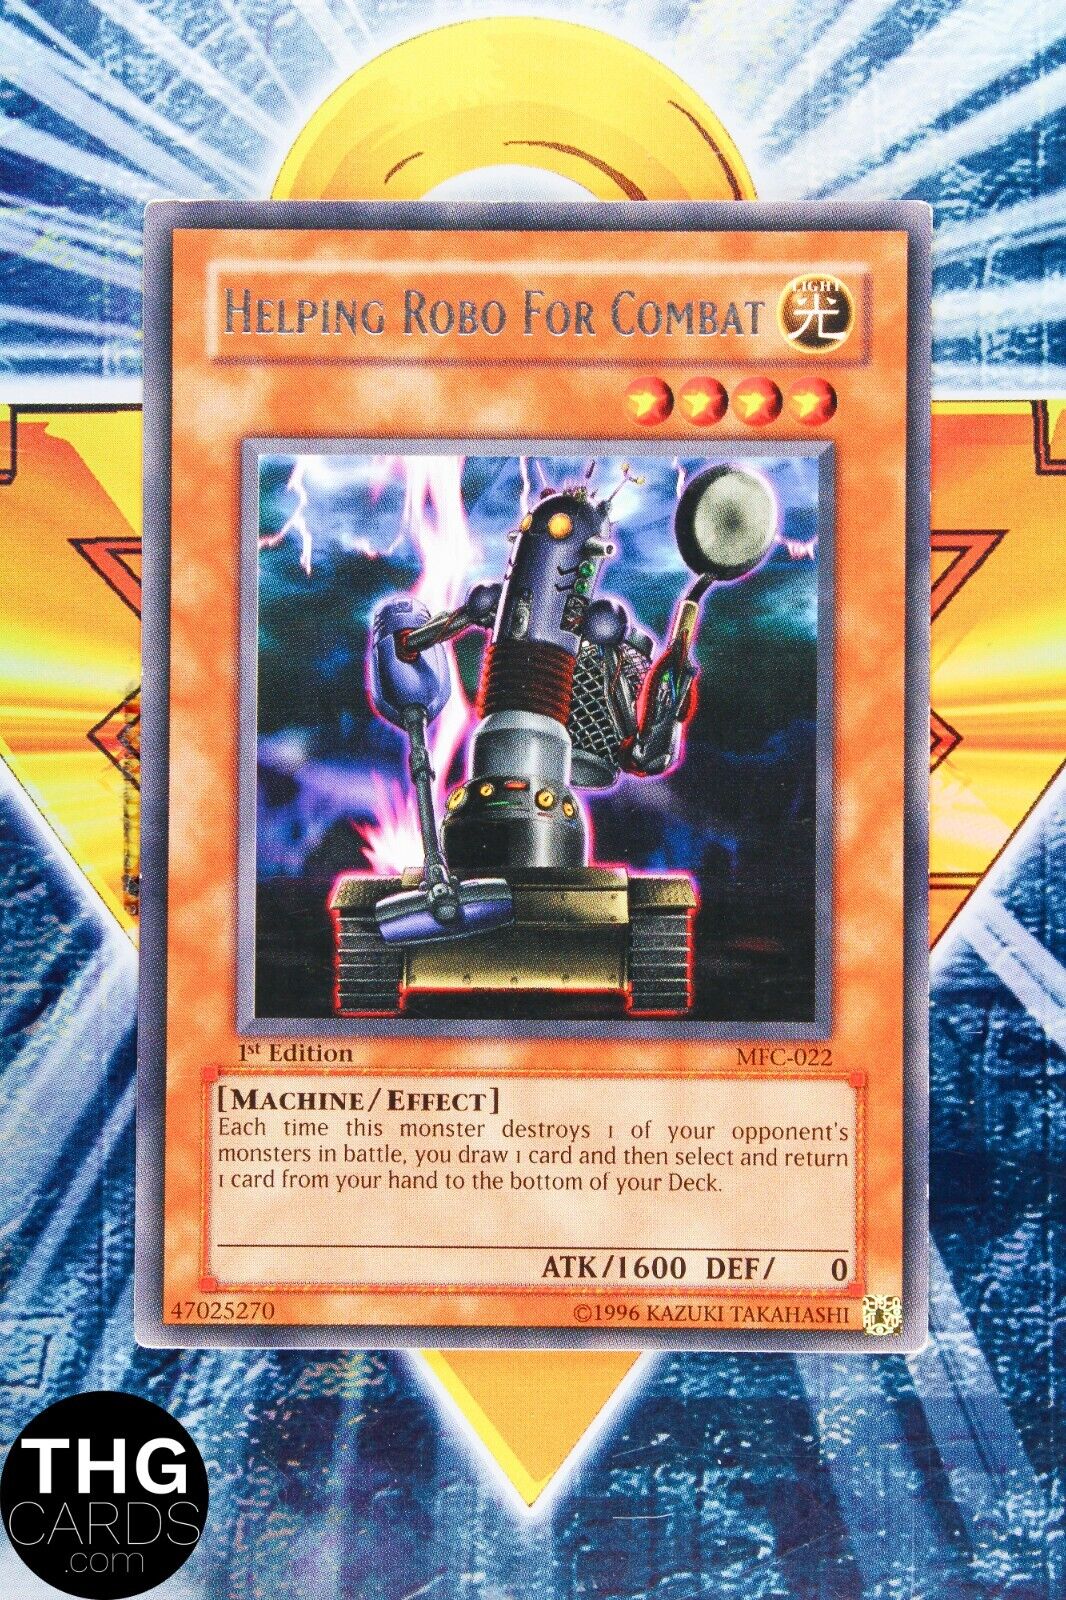 Helping Robo for Combat MFC-022 1st Edition Rare Yugioh Card